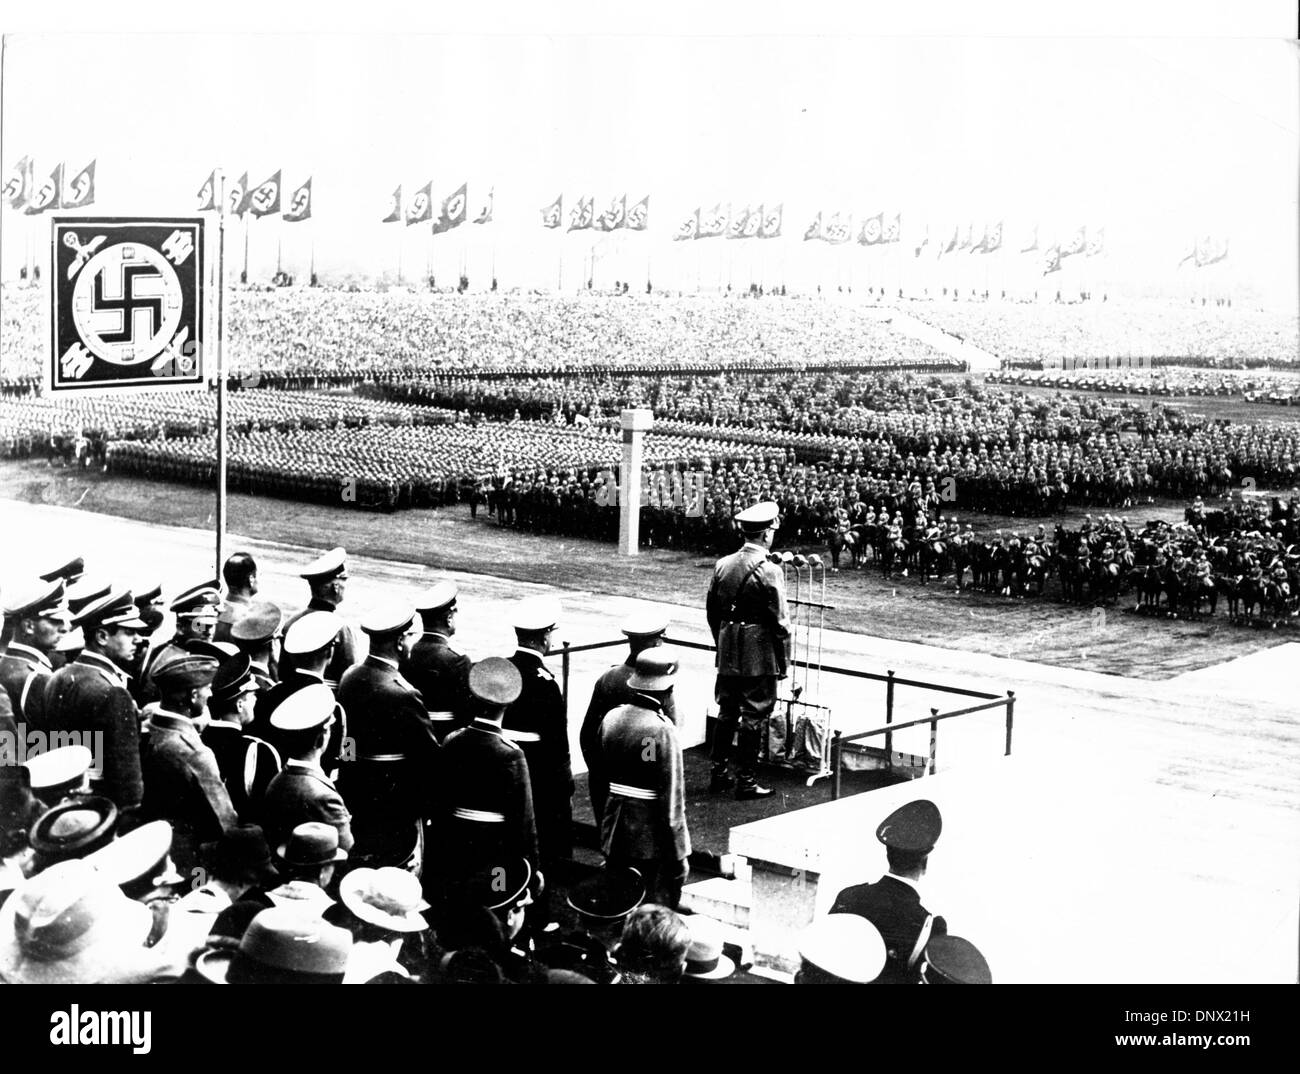 Sept. 13, 1938 - Munich, Bavaria, Germany - General view of Nazi leader ADOLF HITLER addressing the troops on the Zeppelin Field in Munich, Germany. (Credit Image: © KEYSTONE Pictures USA/ZUMAPRESS.com) Stock Photo